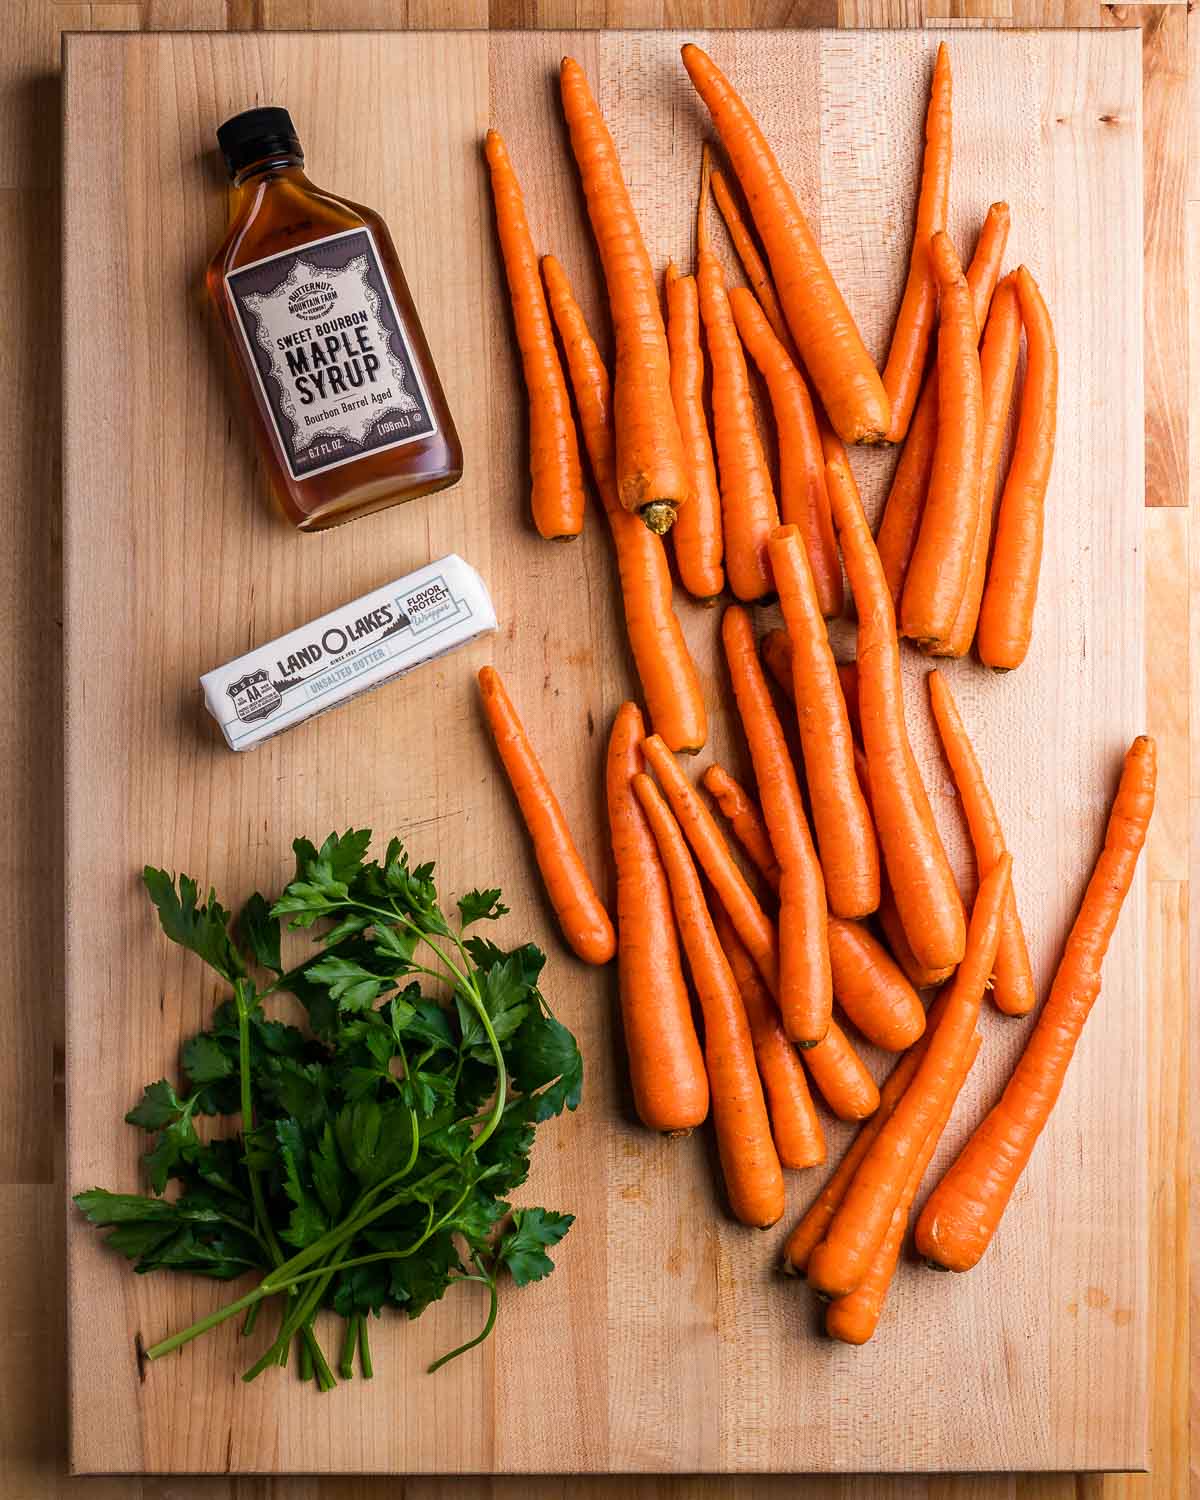 Ingredients shown: maple syrup, 1 stick of butter, parsley, and loose carrots.